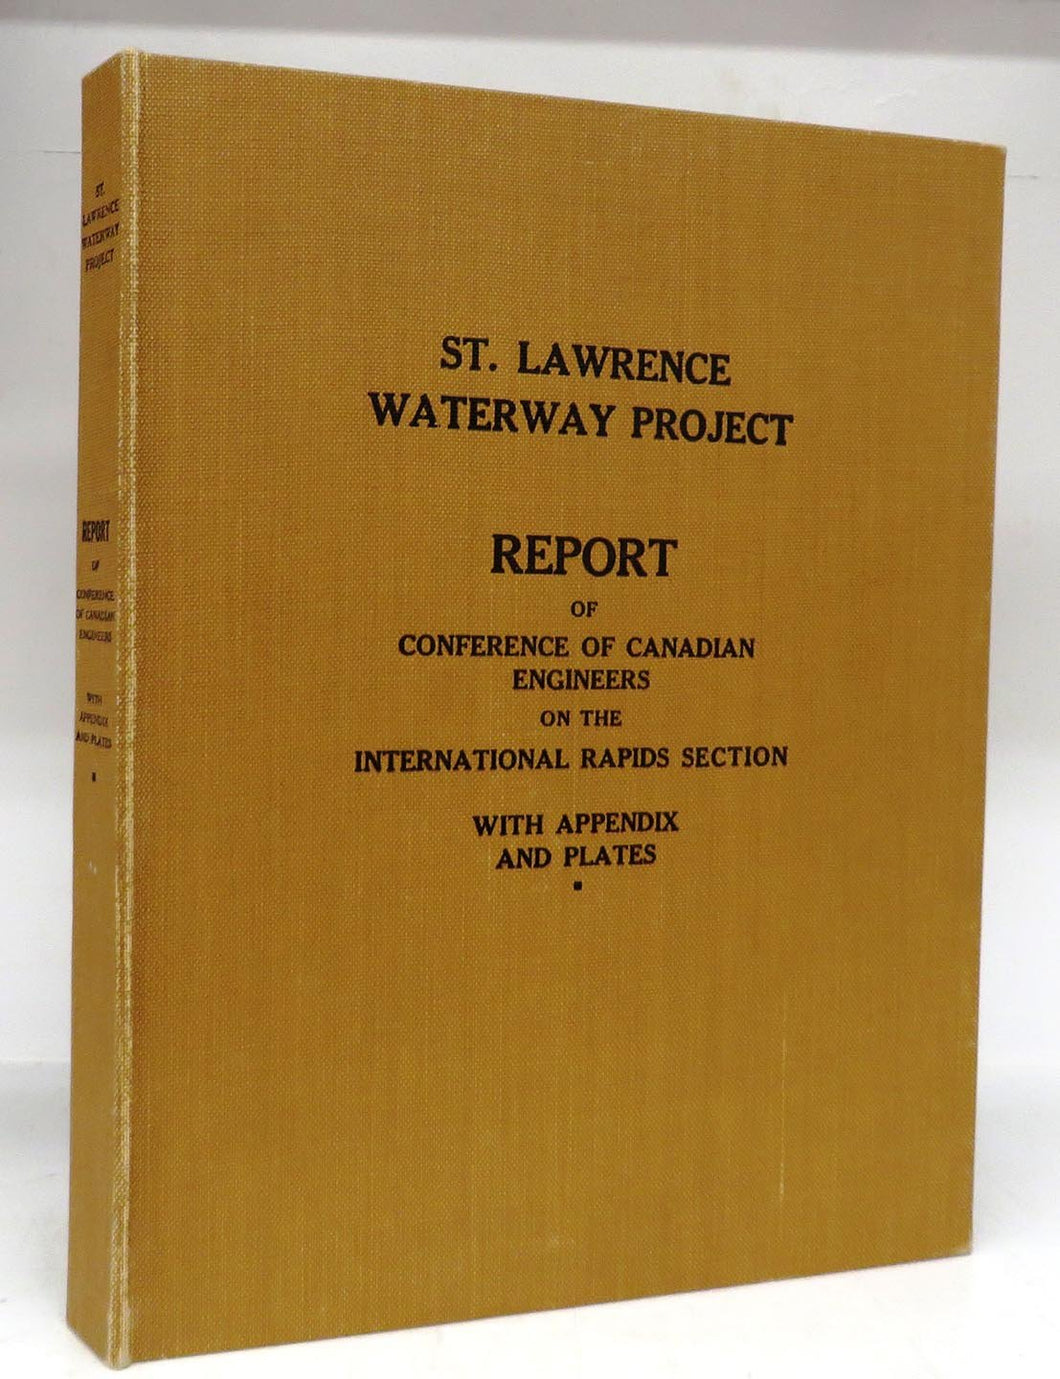 St. Lawrence Waterway Project: Report of Conference of Canadian Engineers on the International Rapids Section of the St. Lawrence River. With Appendix and Plates. Dated December 30, 1929